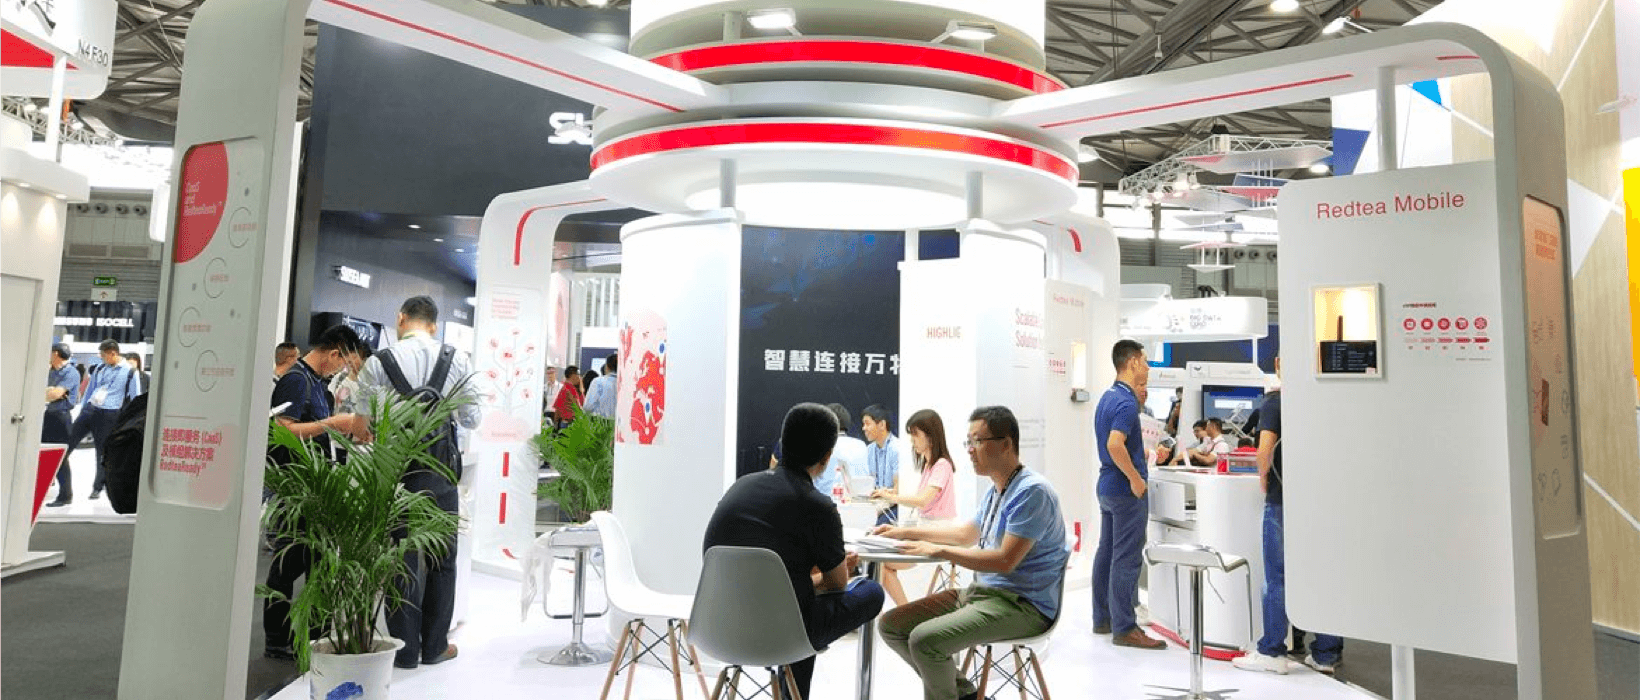 MWC18 SHANGHAI: RedTea Mobile Launches RedteaReady Solution Which Supports IoT Scalable Deployment